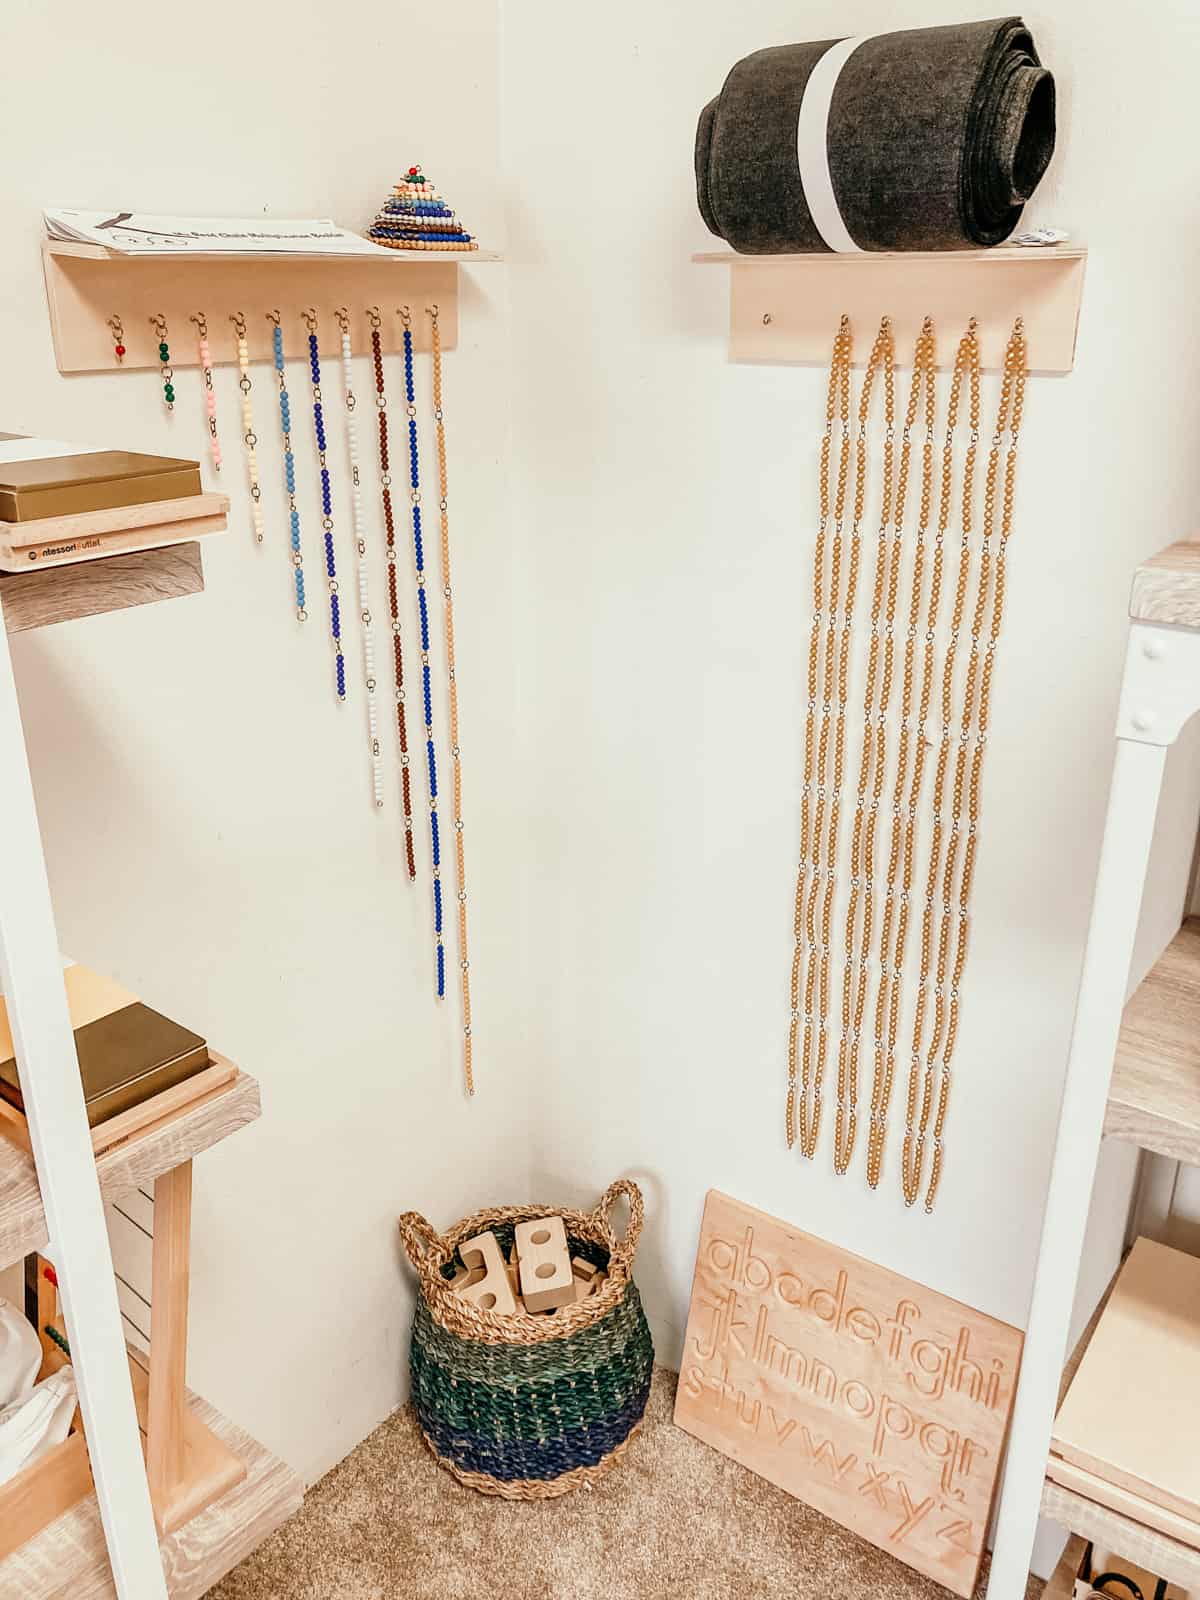 colored bead chains and thousand bead chain hanging on a wall above a basket of Sumblox and a letter tracing board